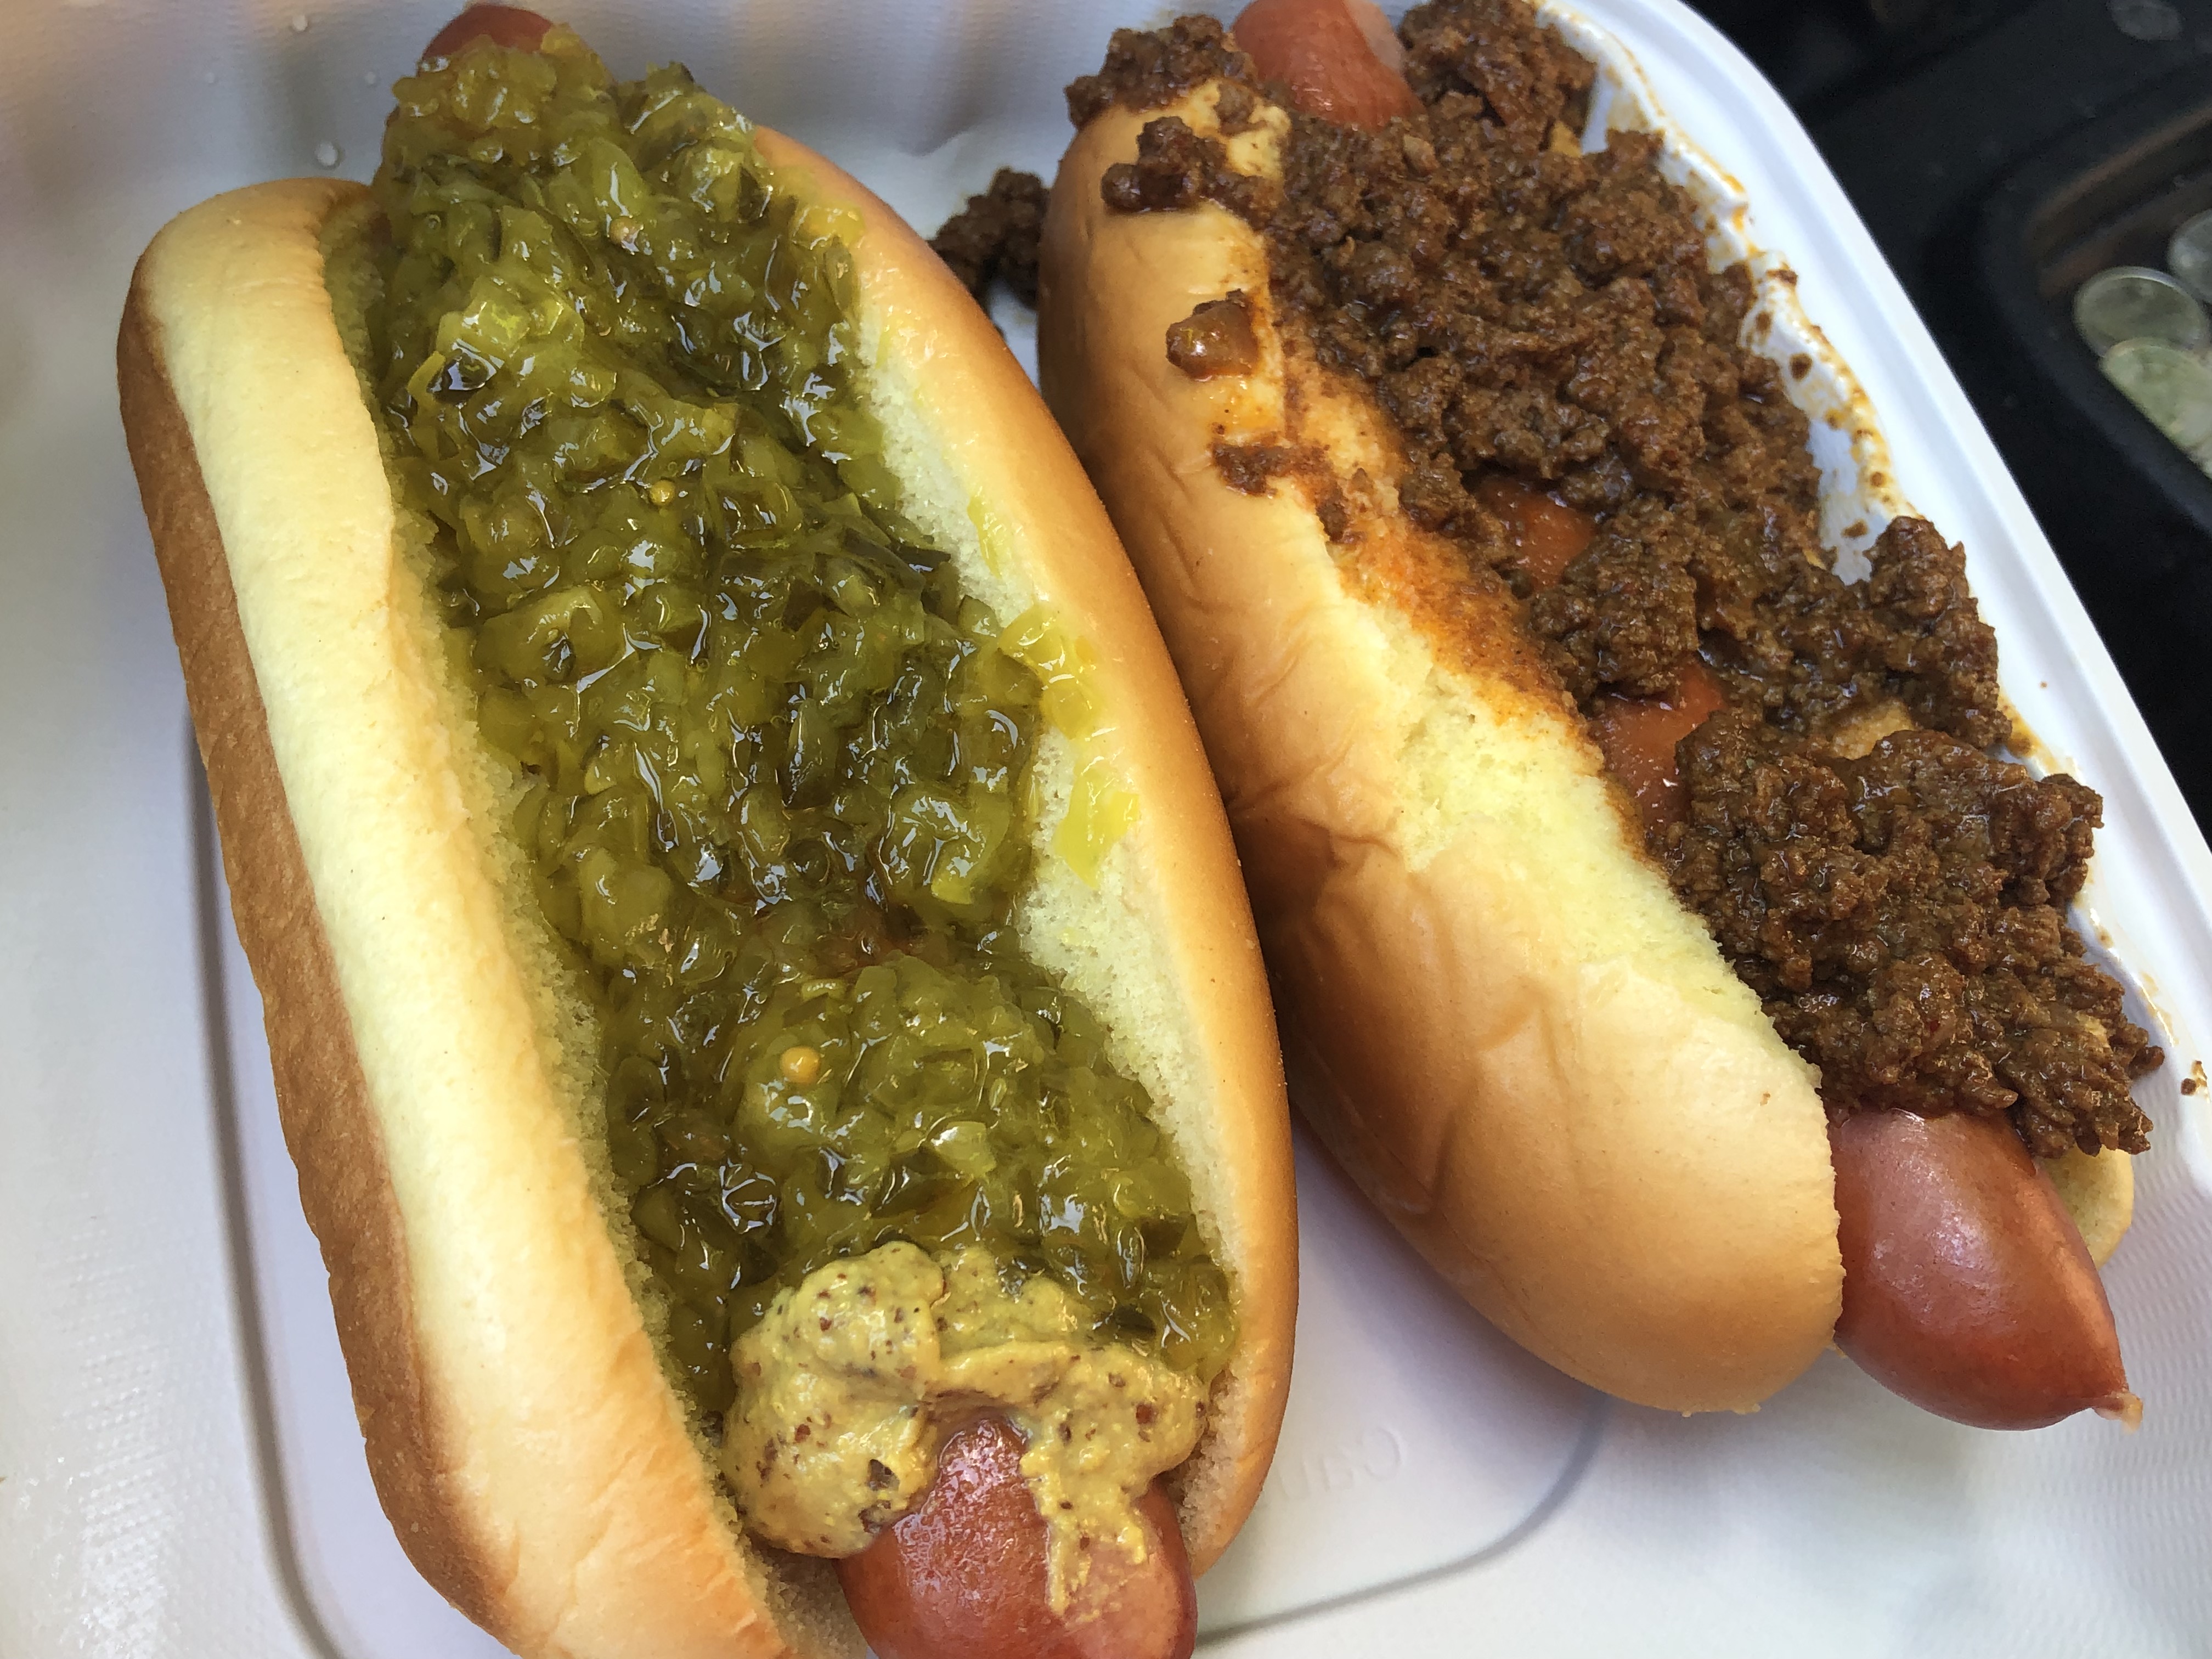 NYC Publication Names North Jersey Hot Dog a Standout